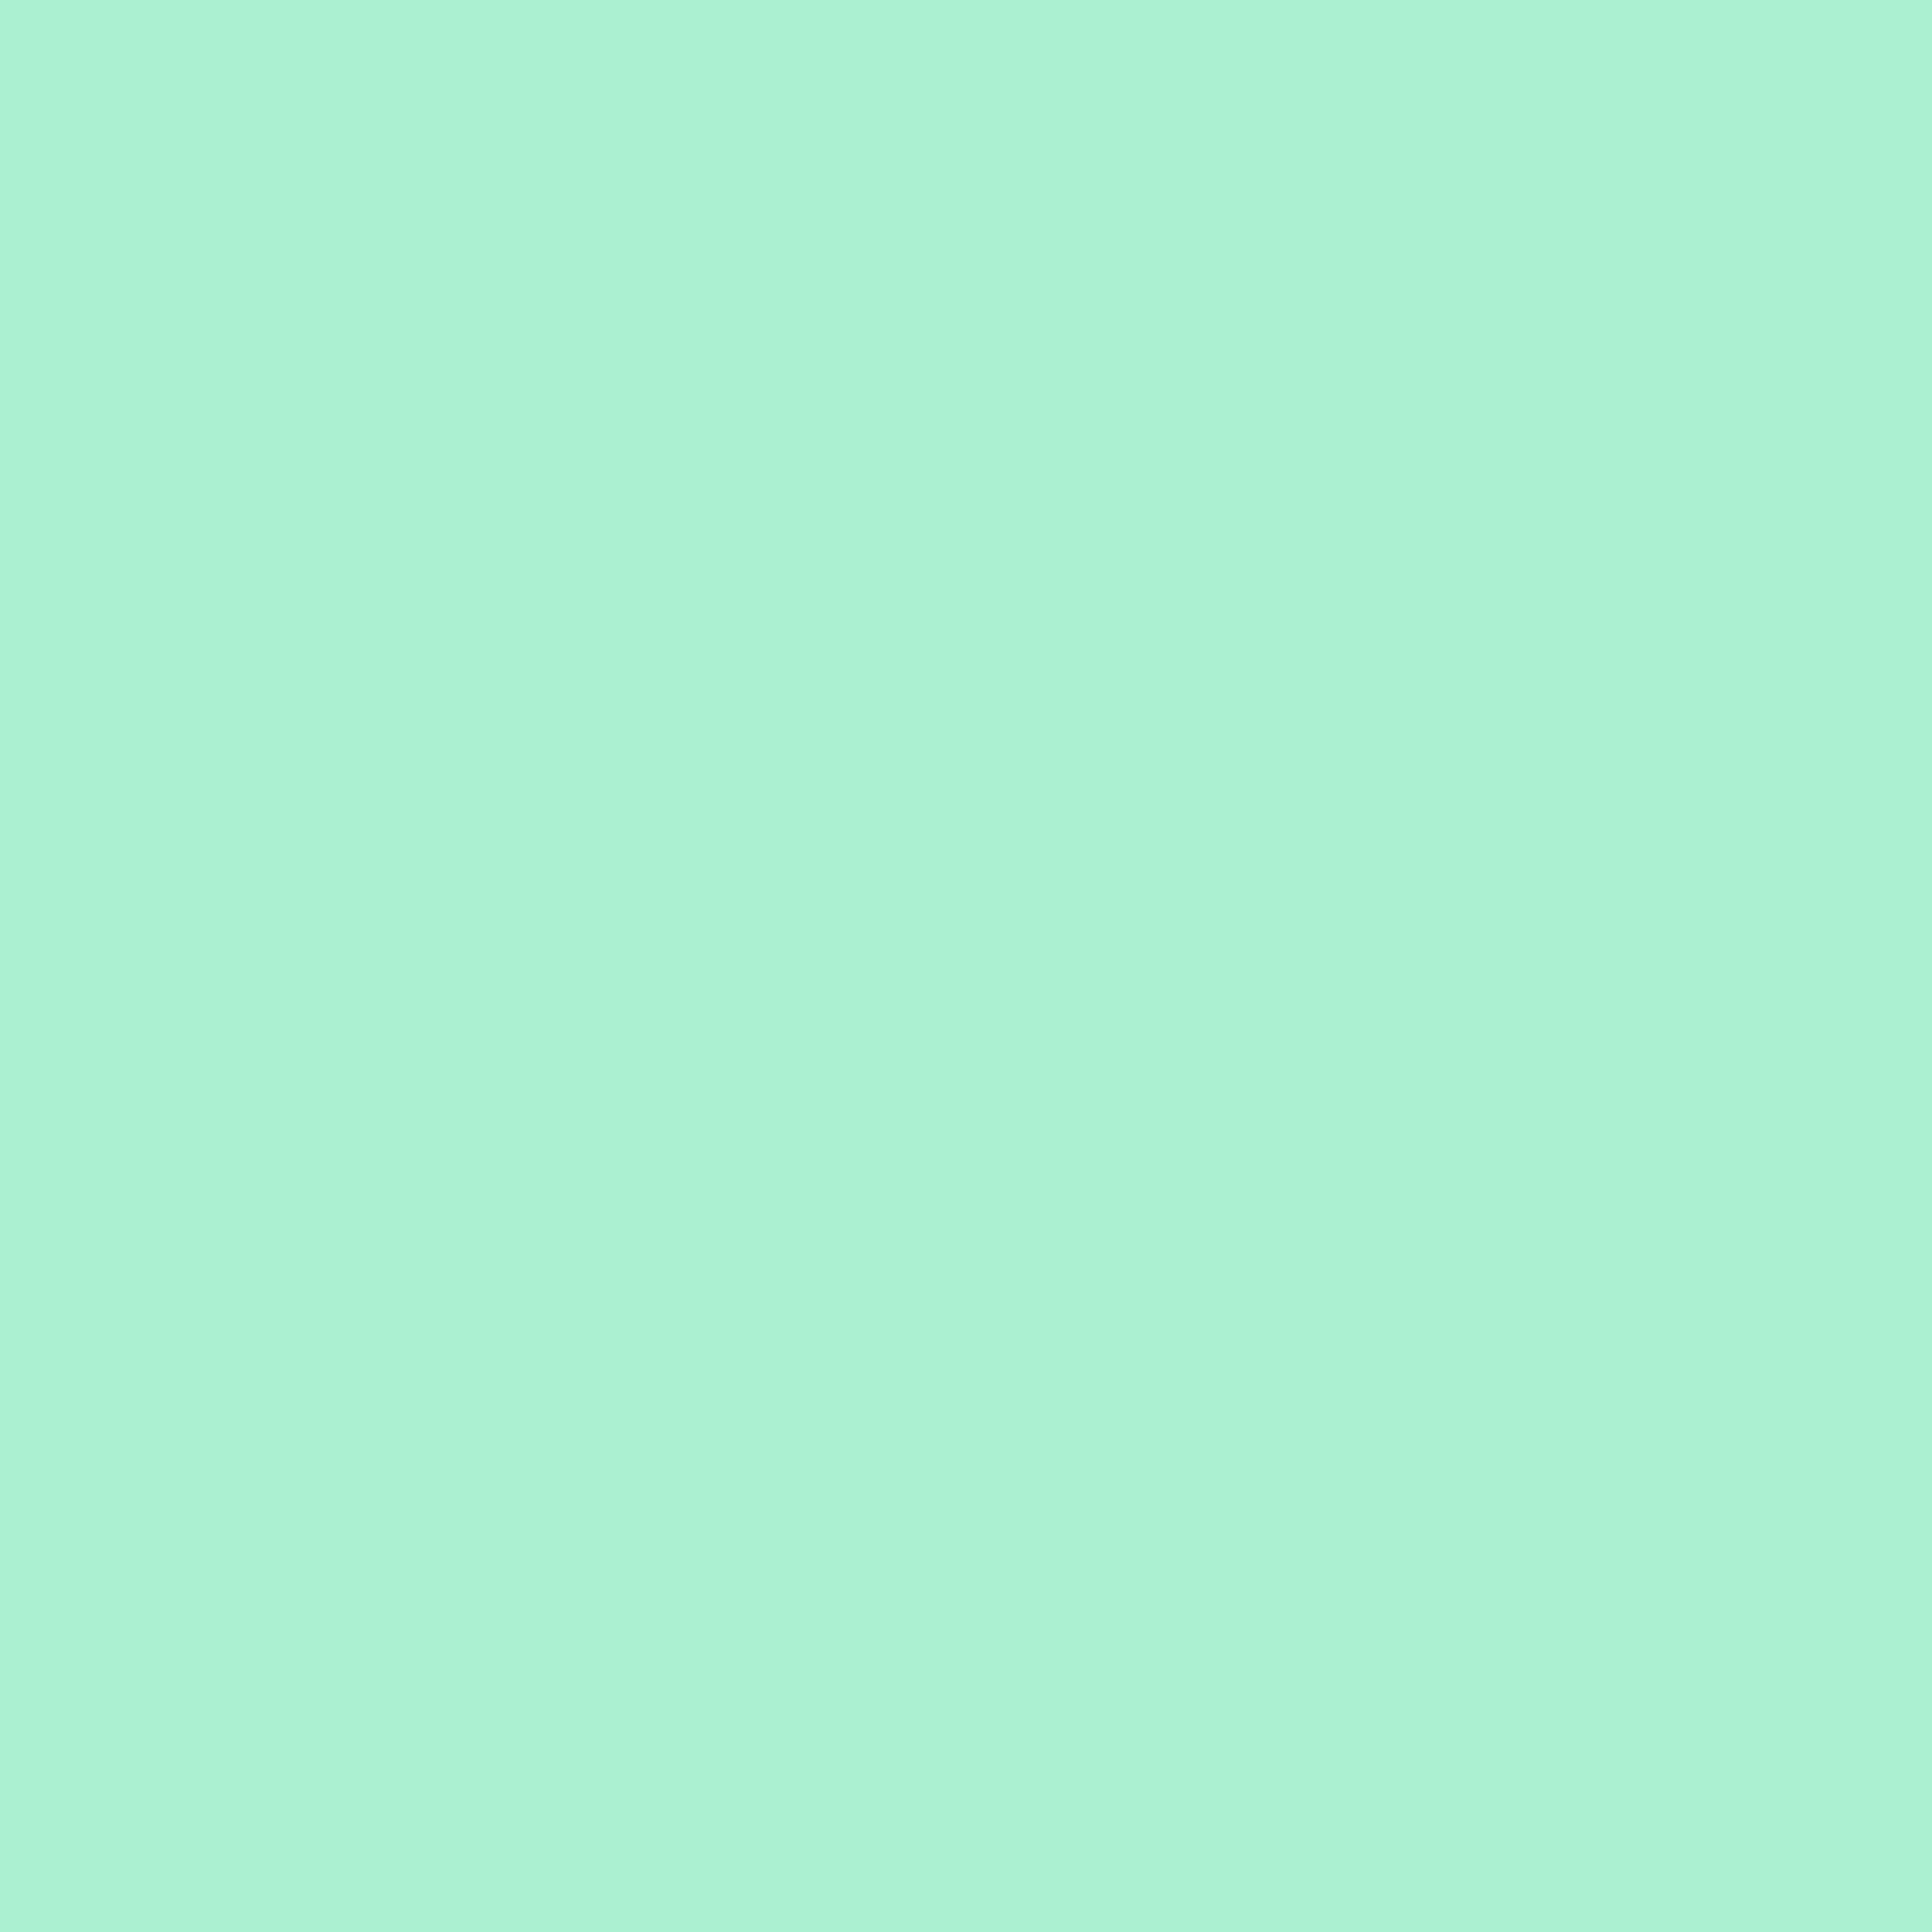 2732x2732 Magic Mint Solid Color Background